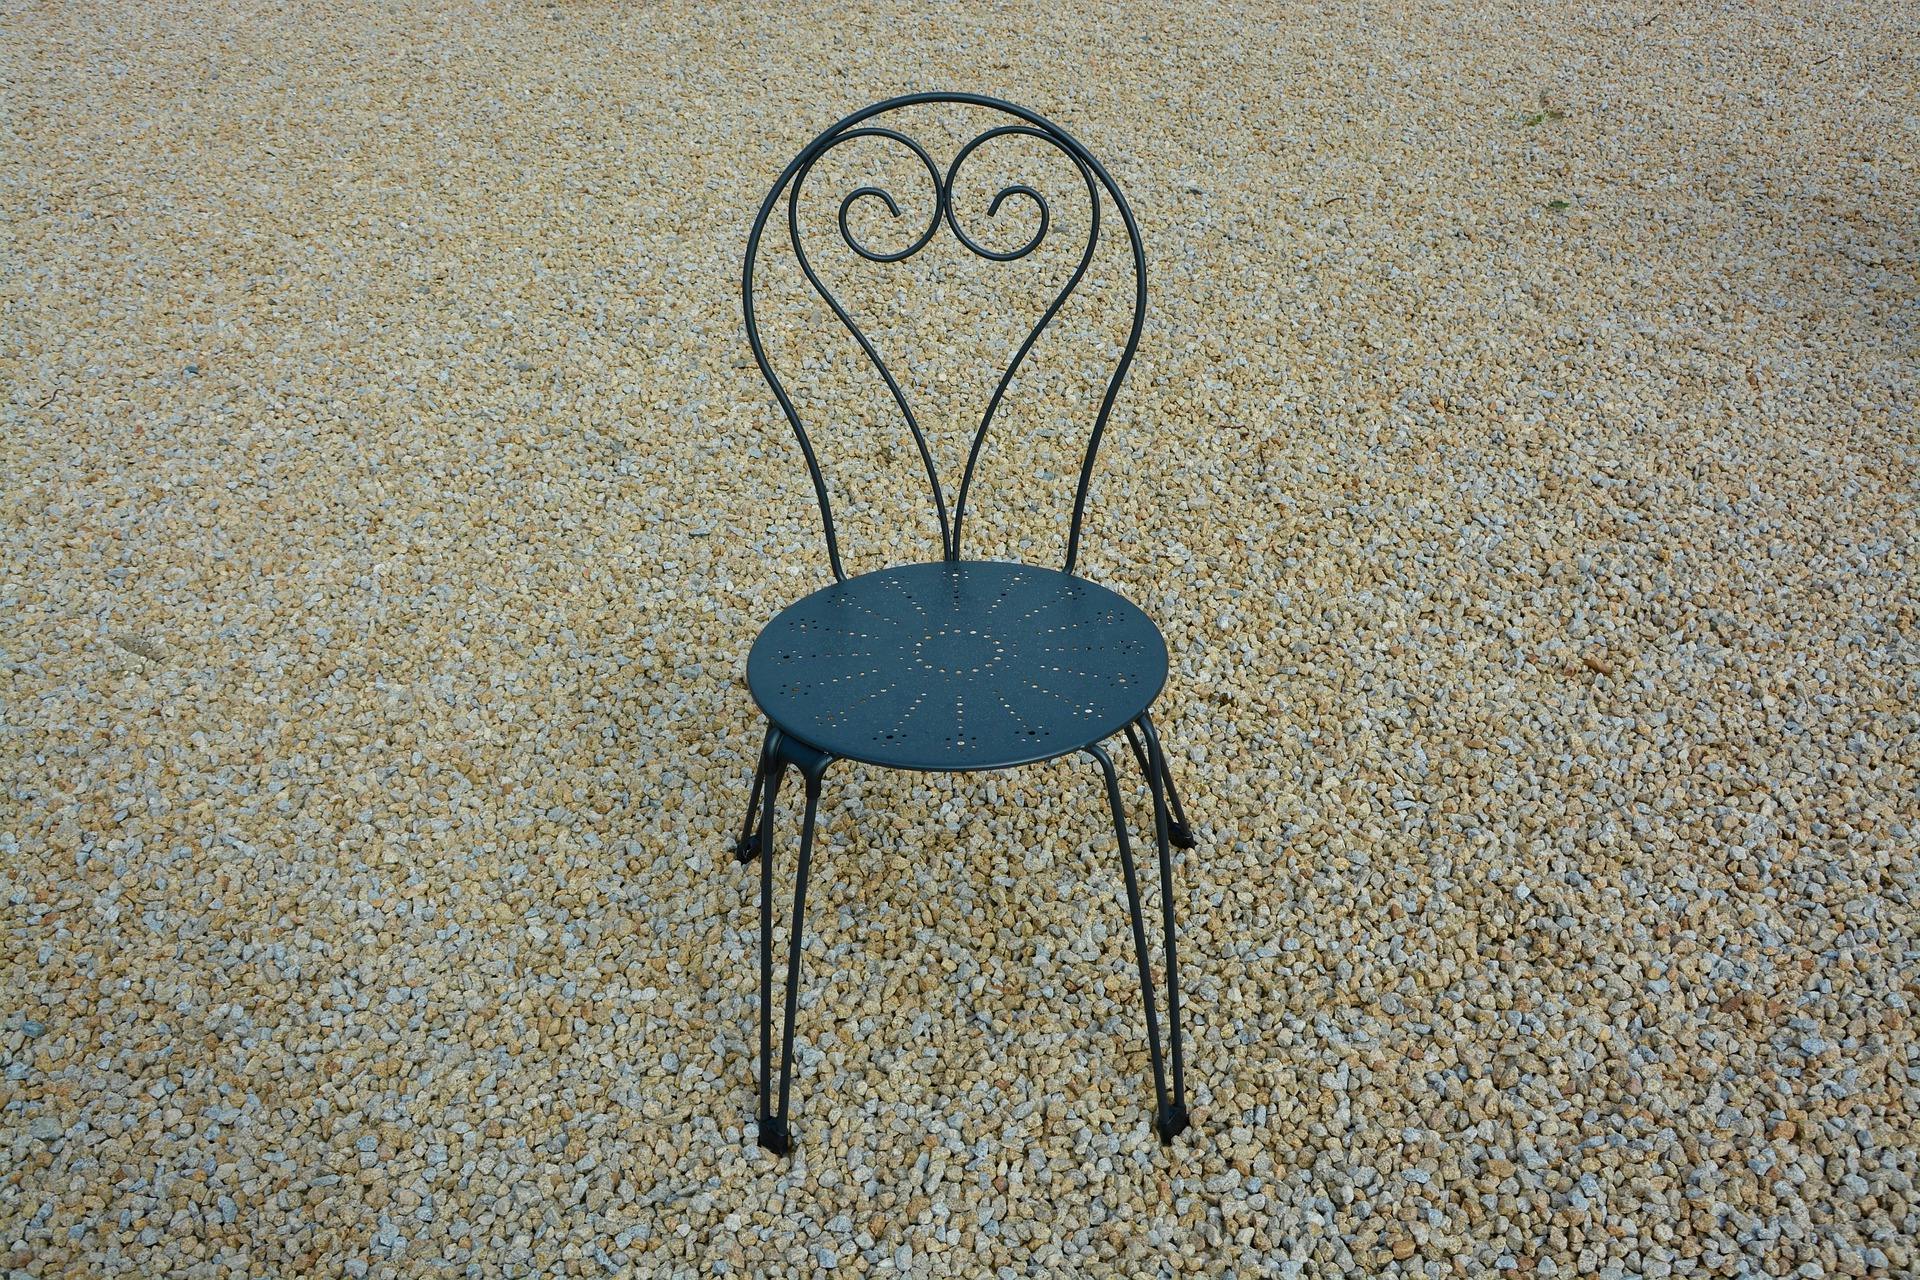 Black wrought iron chair